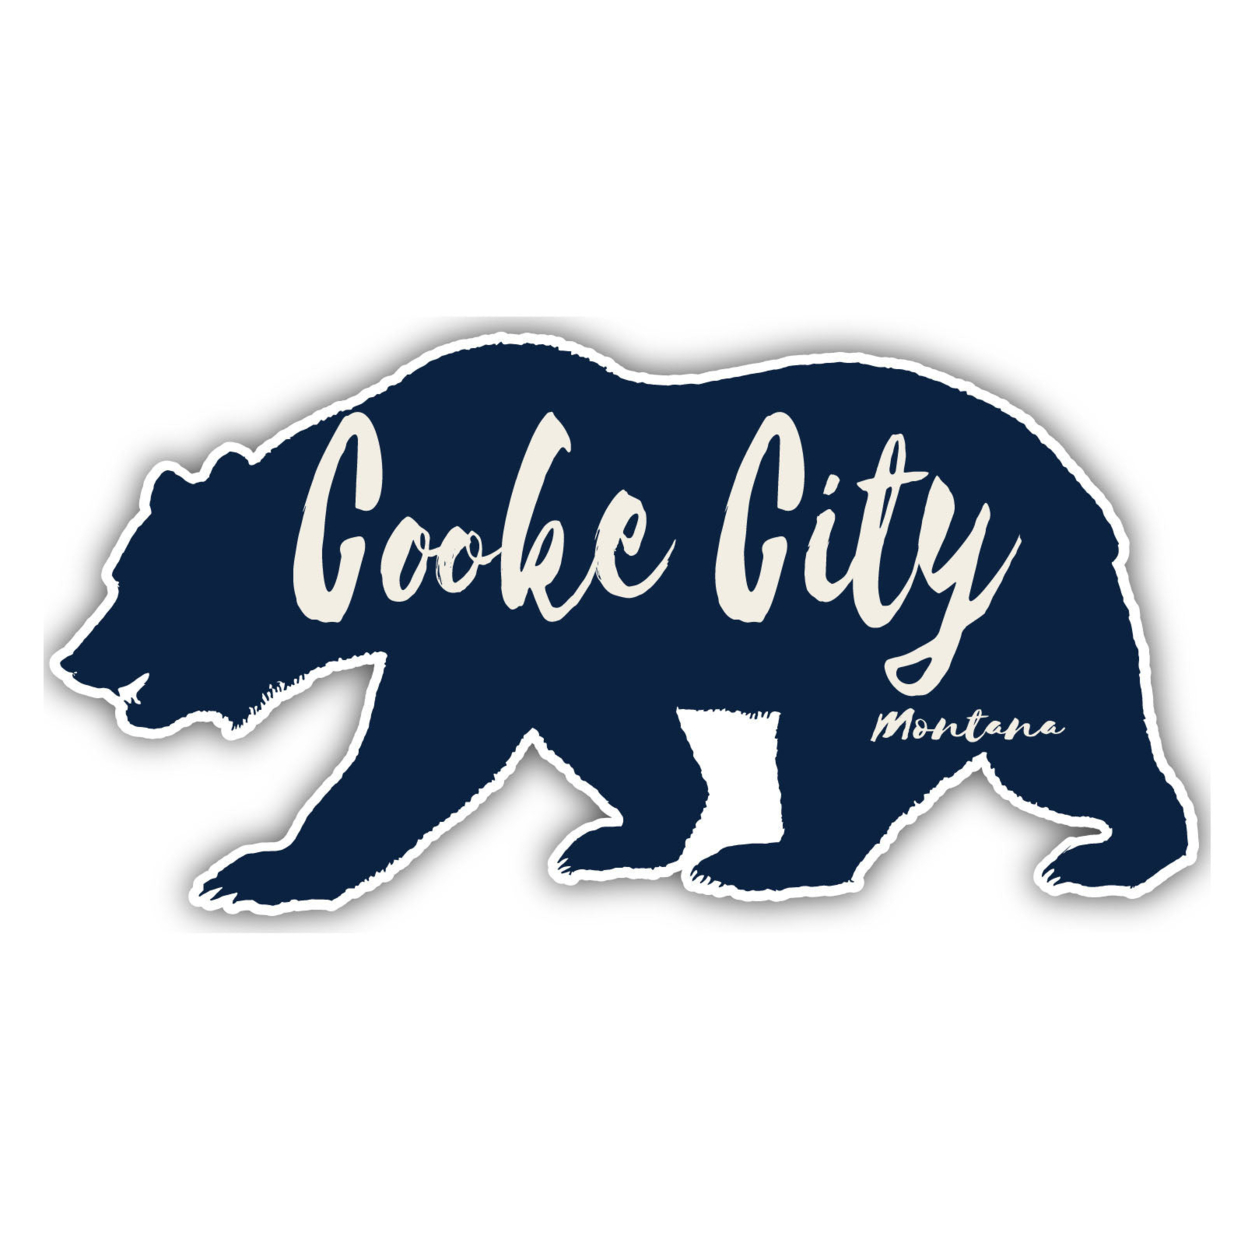 Cooke City Montana Souvenir Decorative Stickers (Choose Theme And Size) - 4-Pack, 6-Inch, Bear